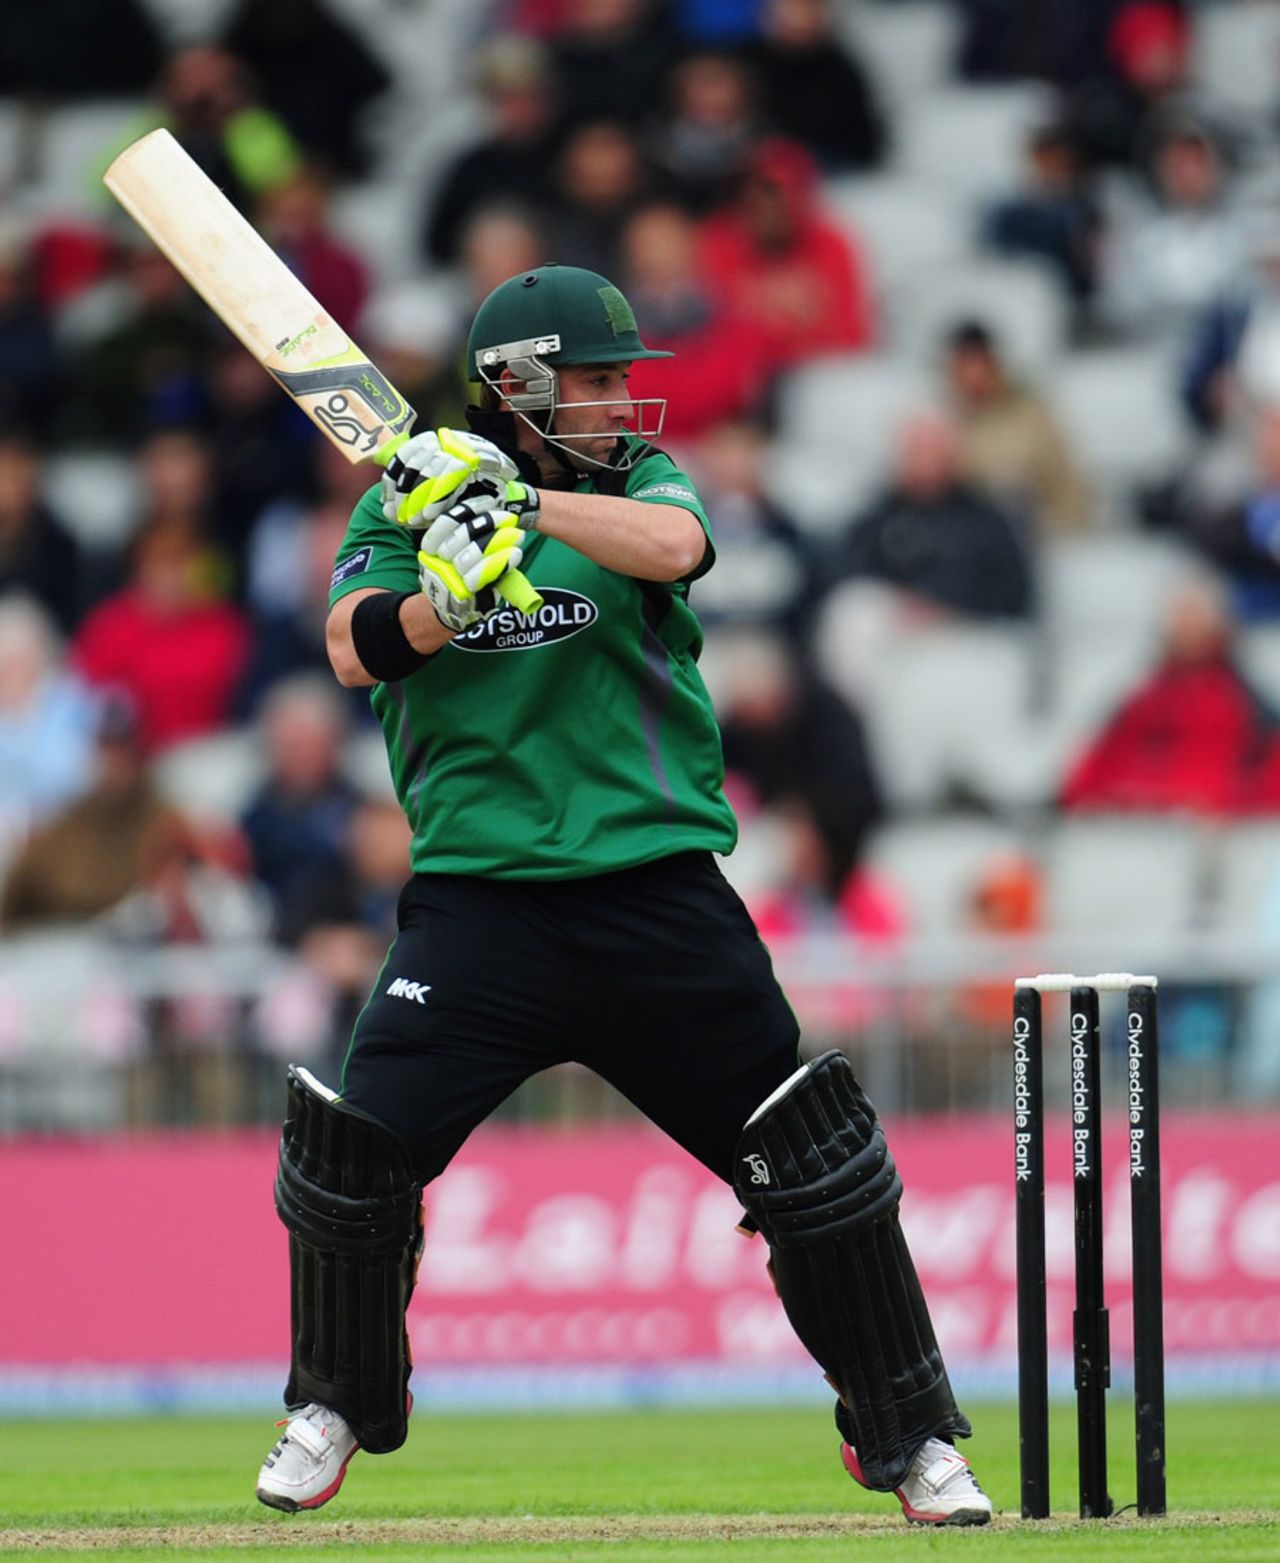 Phillip Hughes continued his good form since joining Worcestershire, Lancashire v Worcestershire, Clydesdale Bank 40, Group A, Old Trafford, June 5, 2012